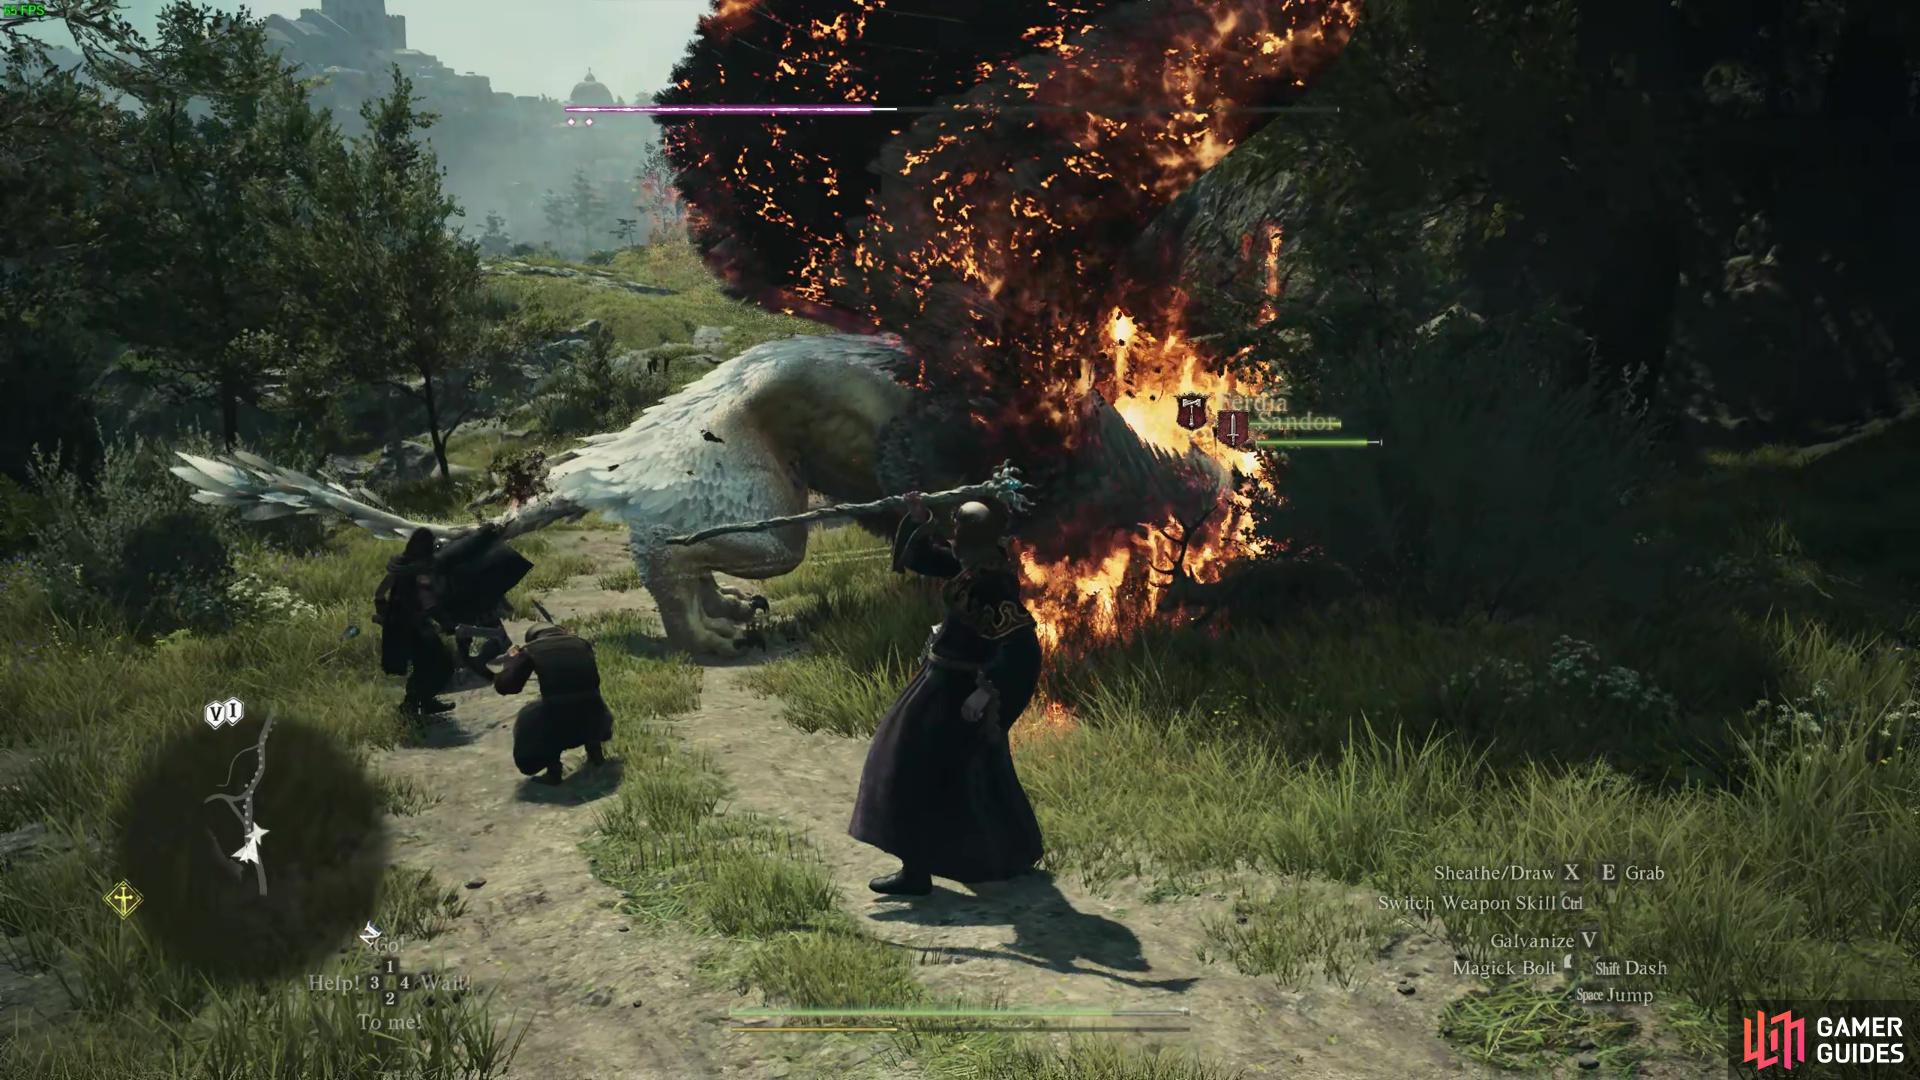 Sorcerers are an effective class for applying strong damage spells and Debilitations to further your damage in fights. Here’s a look at how to build Sorcerers in Dragon’s Dogma 2.